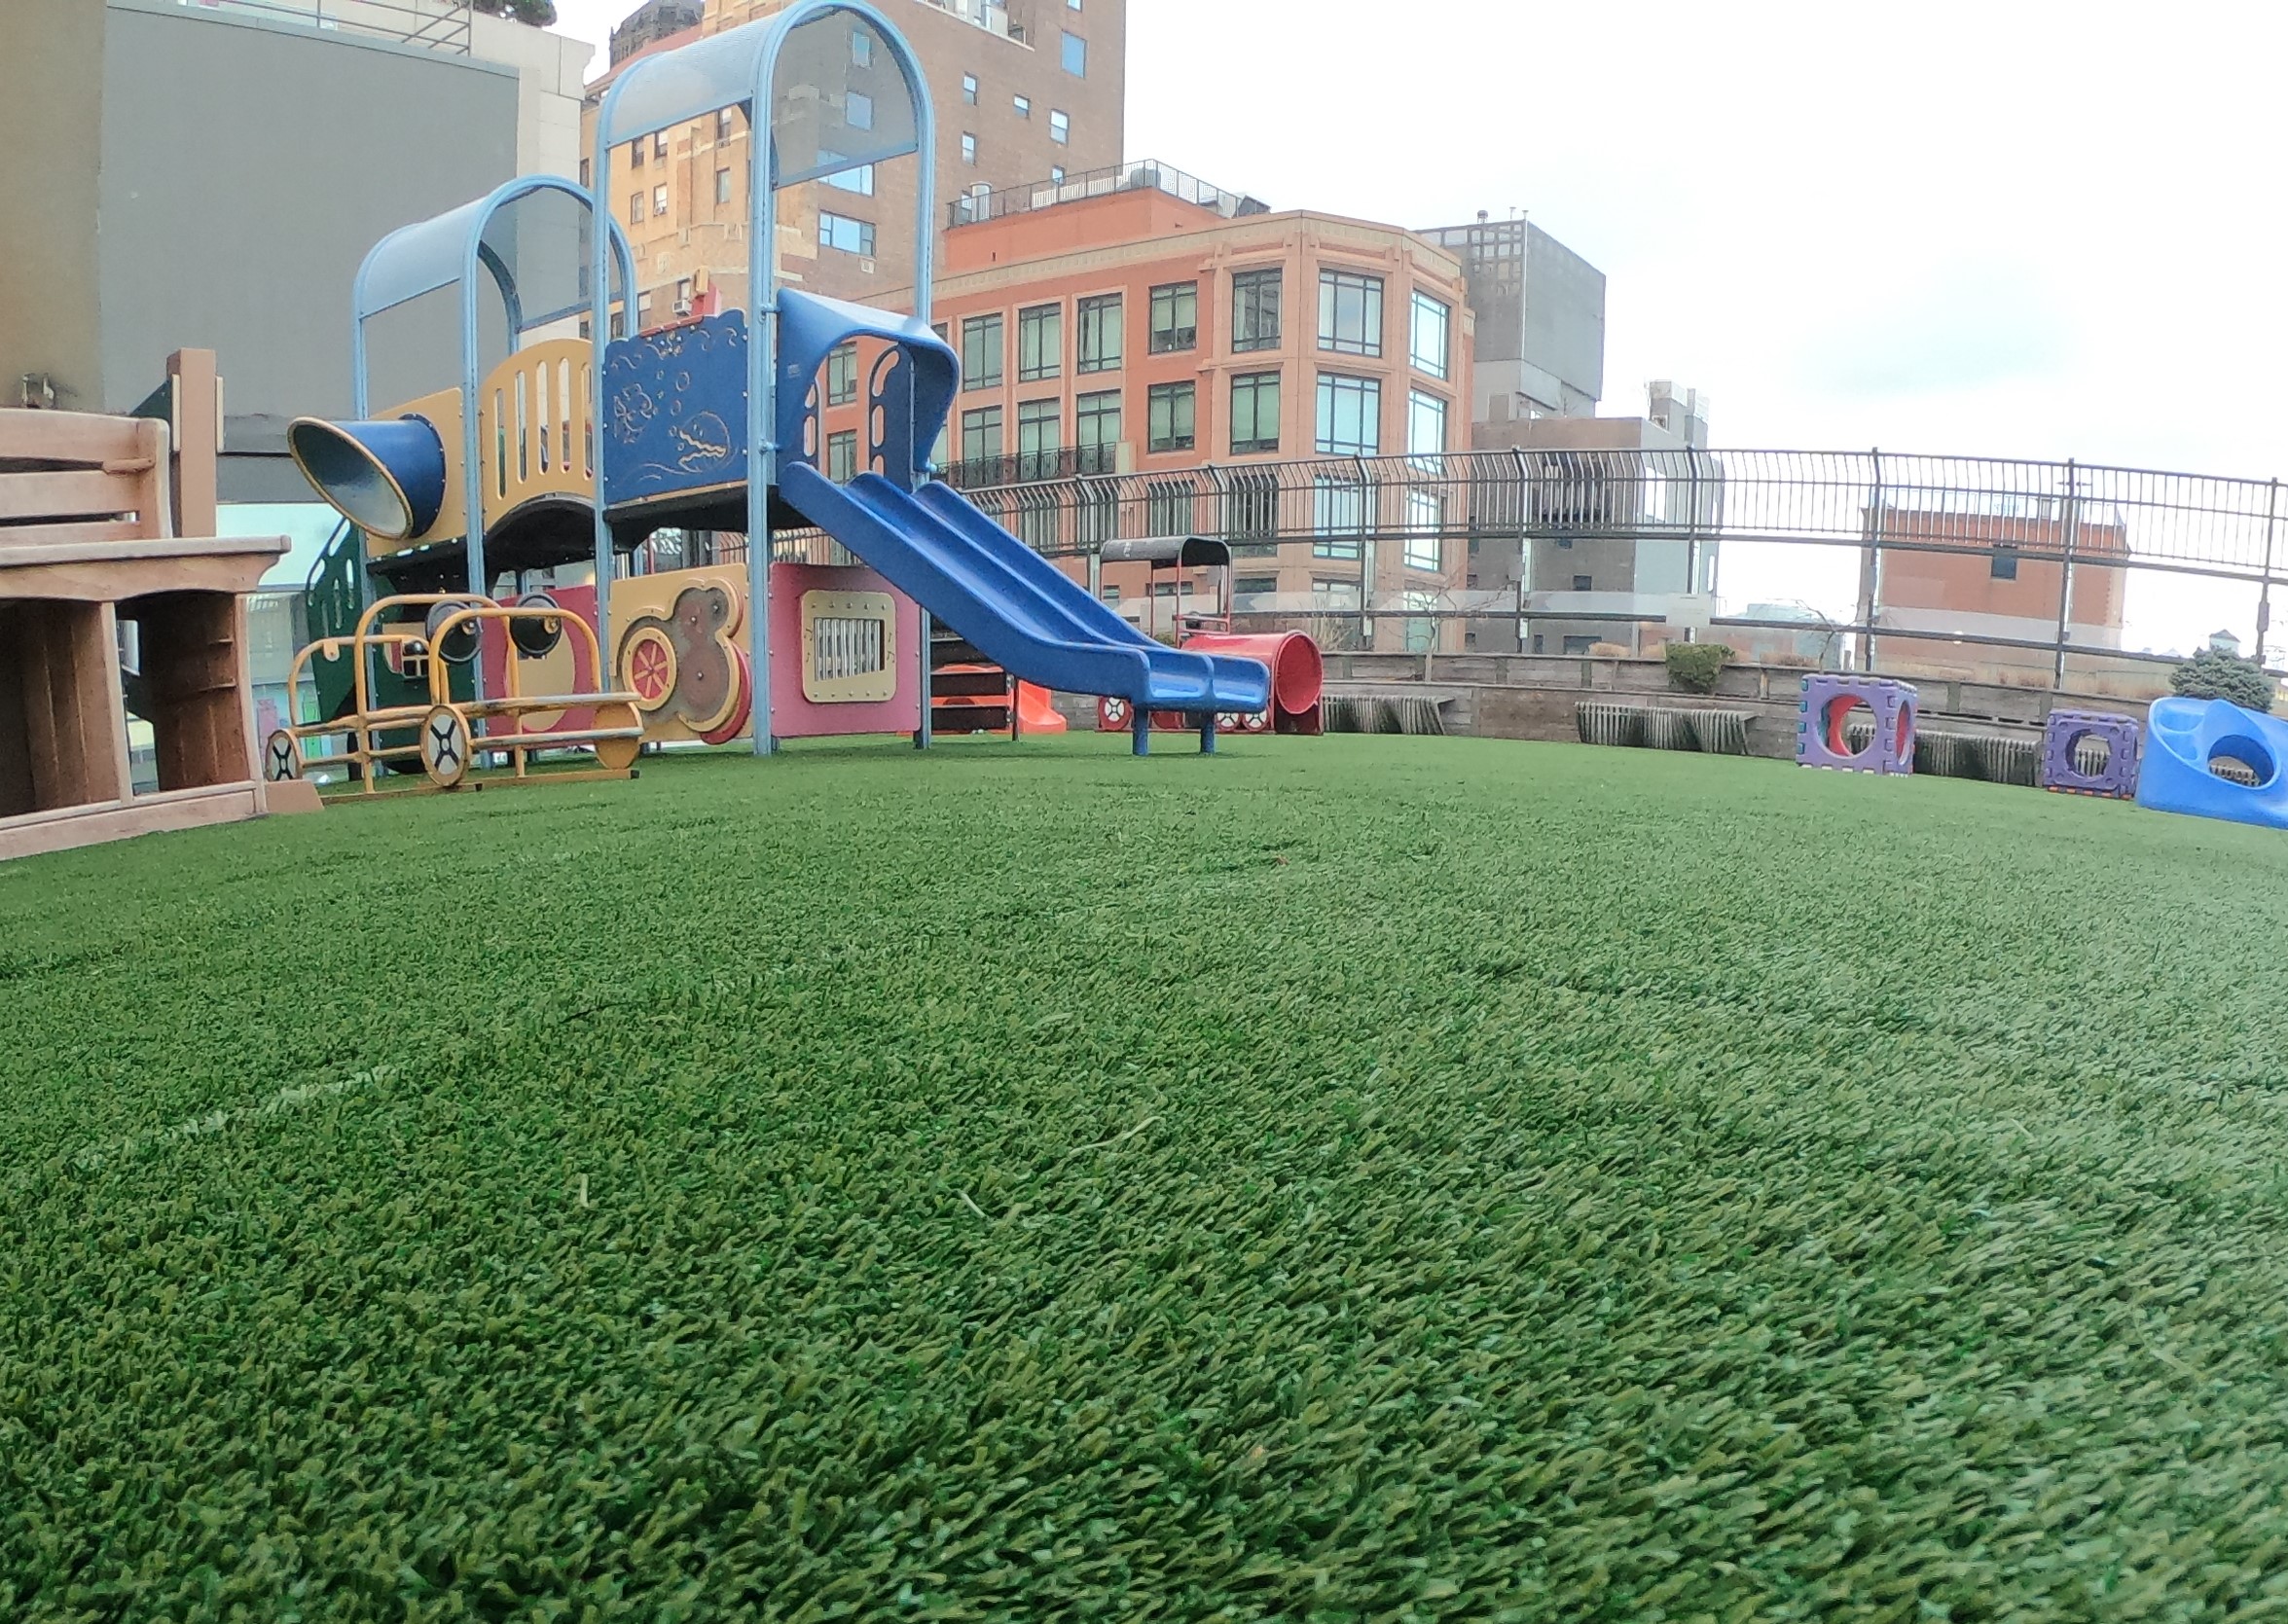 UNITY Surfacing at Rooftop Playground using Turf-Tiles for JCC (12)